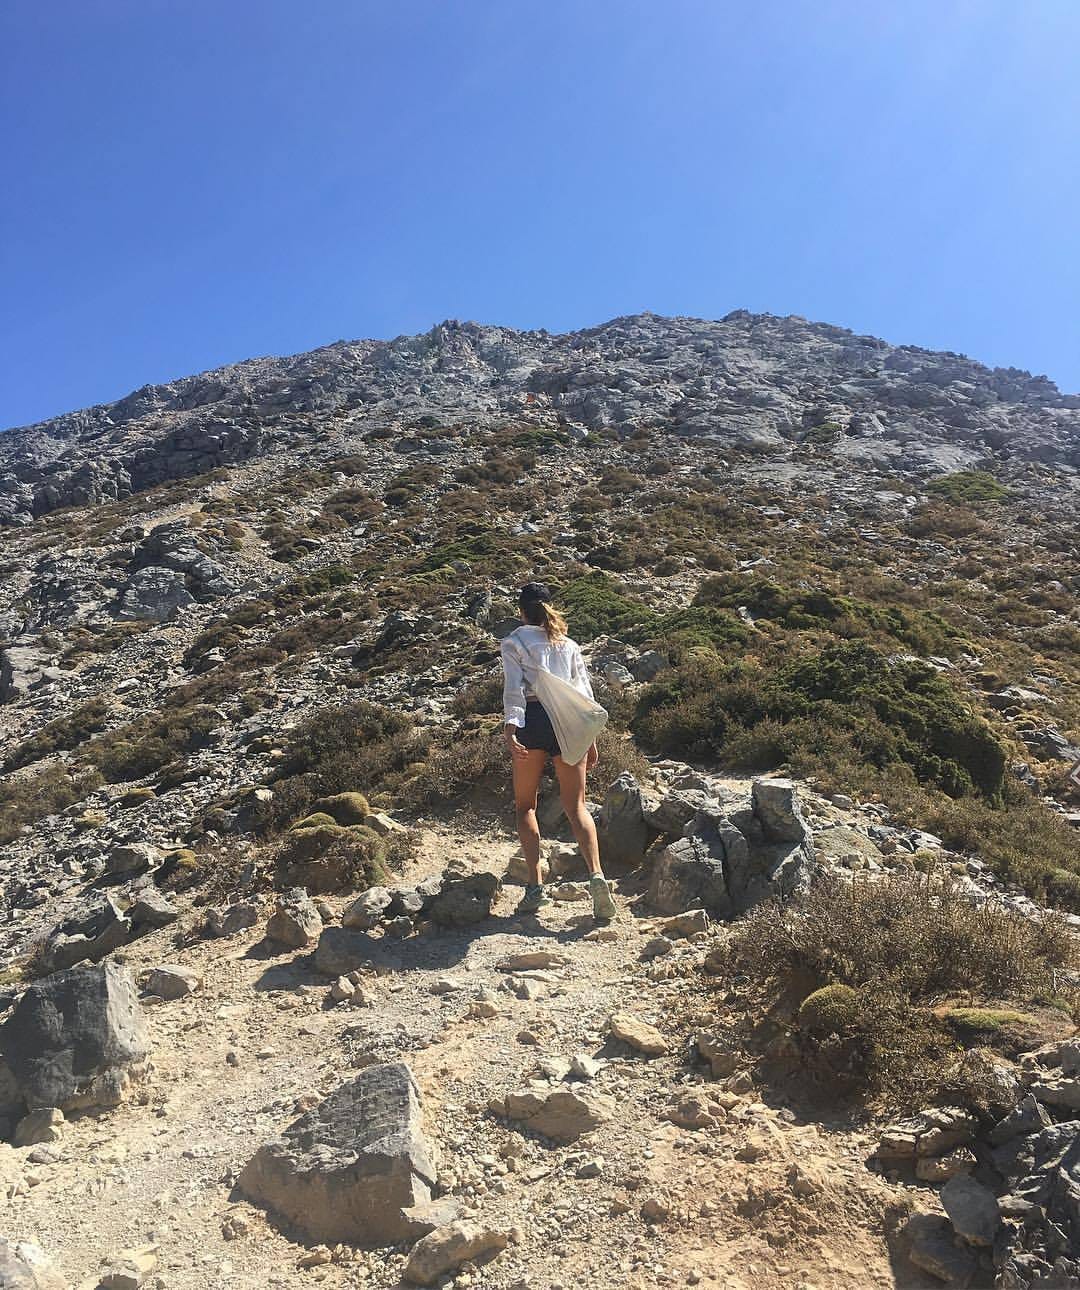 https%3A%2F%2Fsubstack post media.s3.amazonaws.com%2Fpublic%2Fimages%2Fb57996dc 02f4 4501 a90f The White Mountain Trail, Crete, Greece